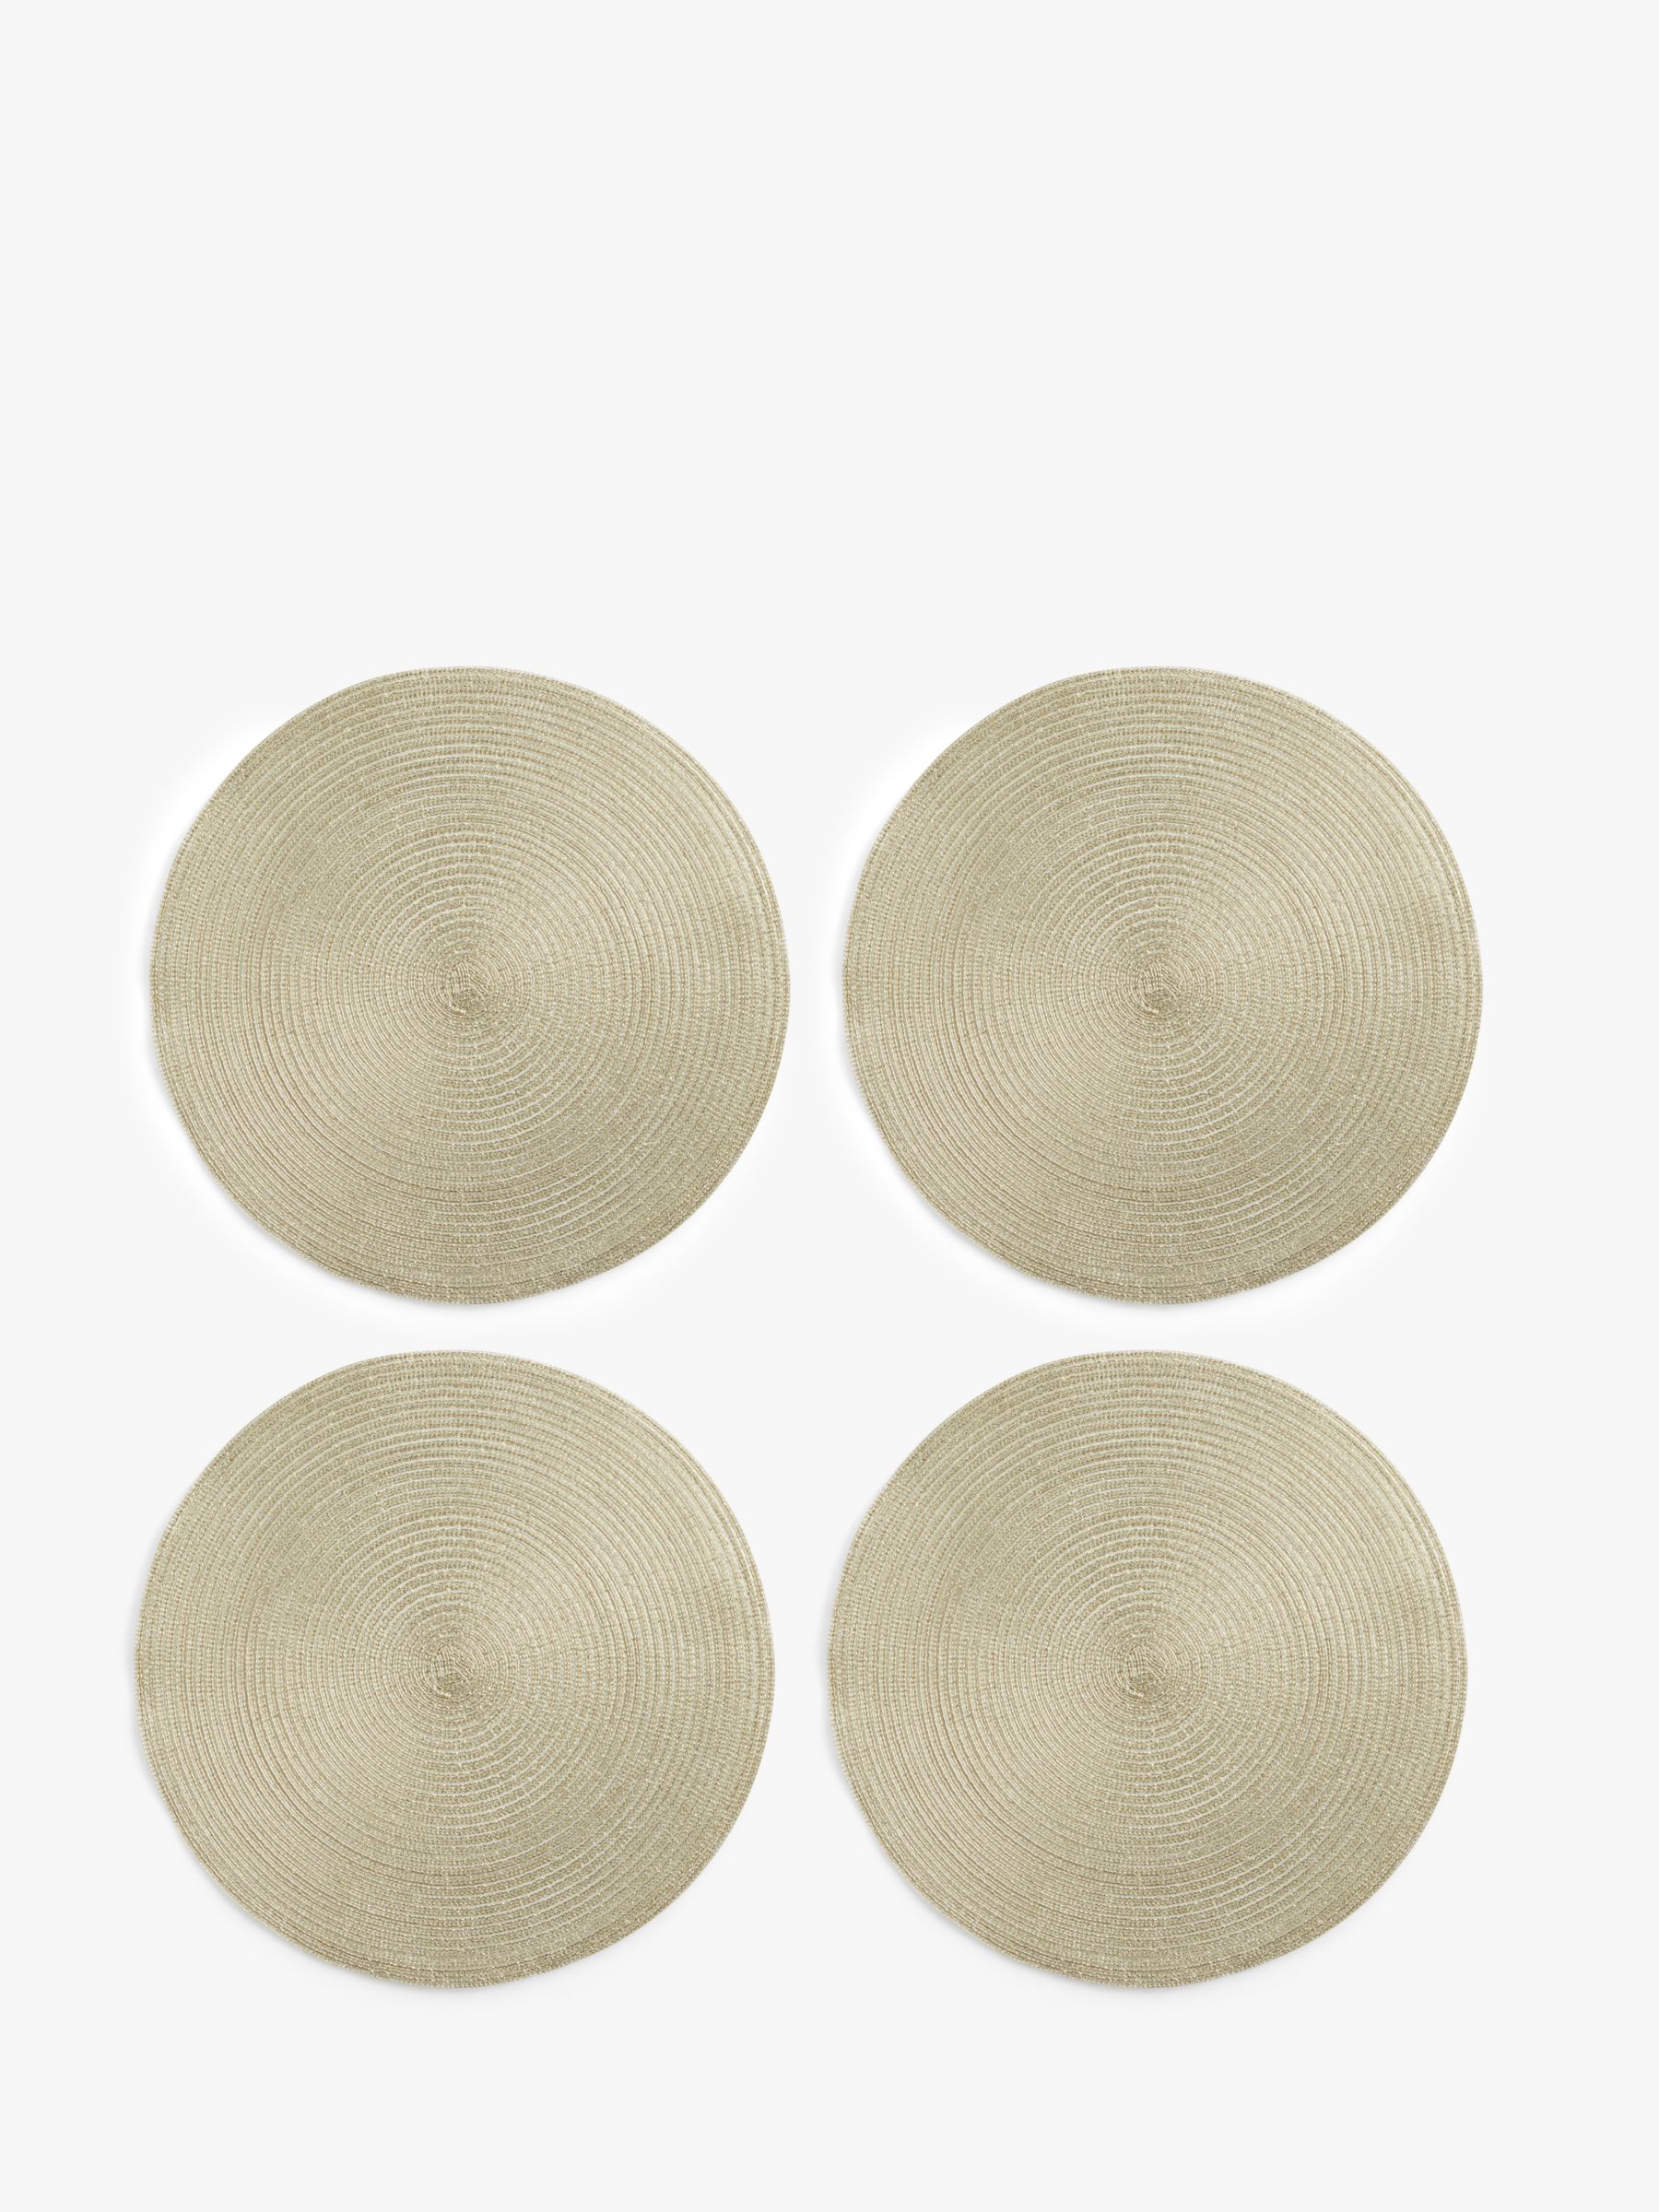 John Lewis Round Braided Sparkle Placemats, Set of 4